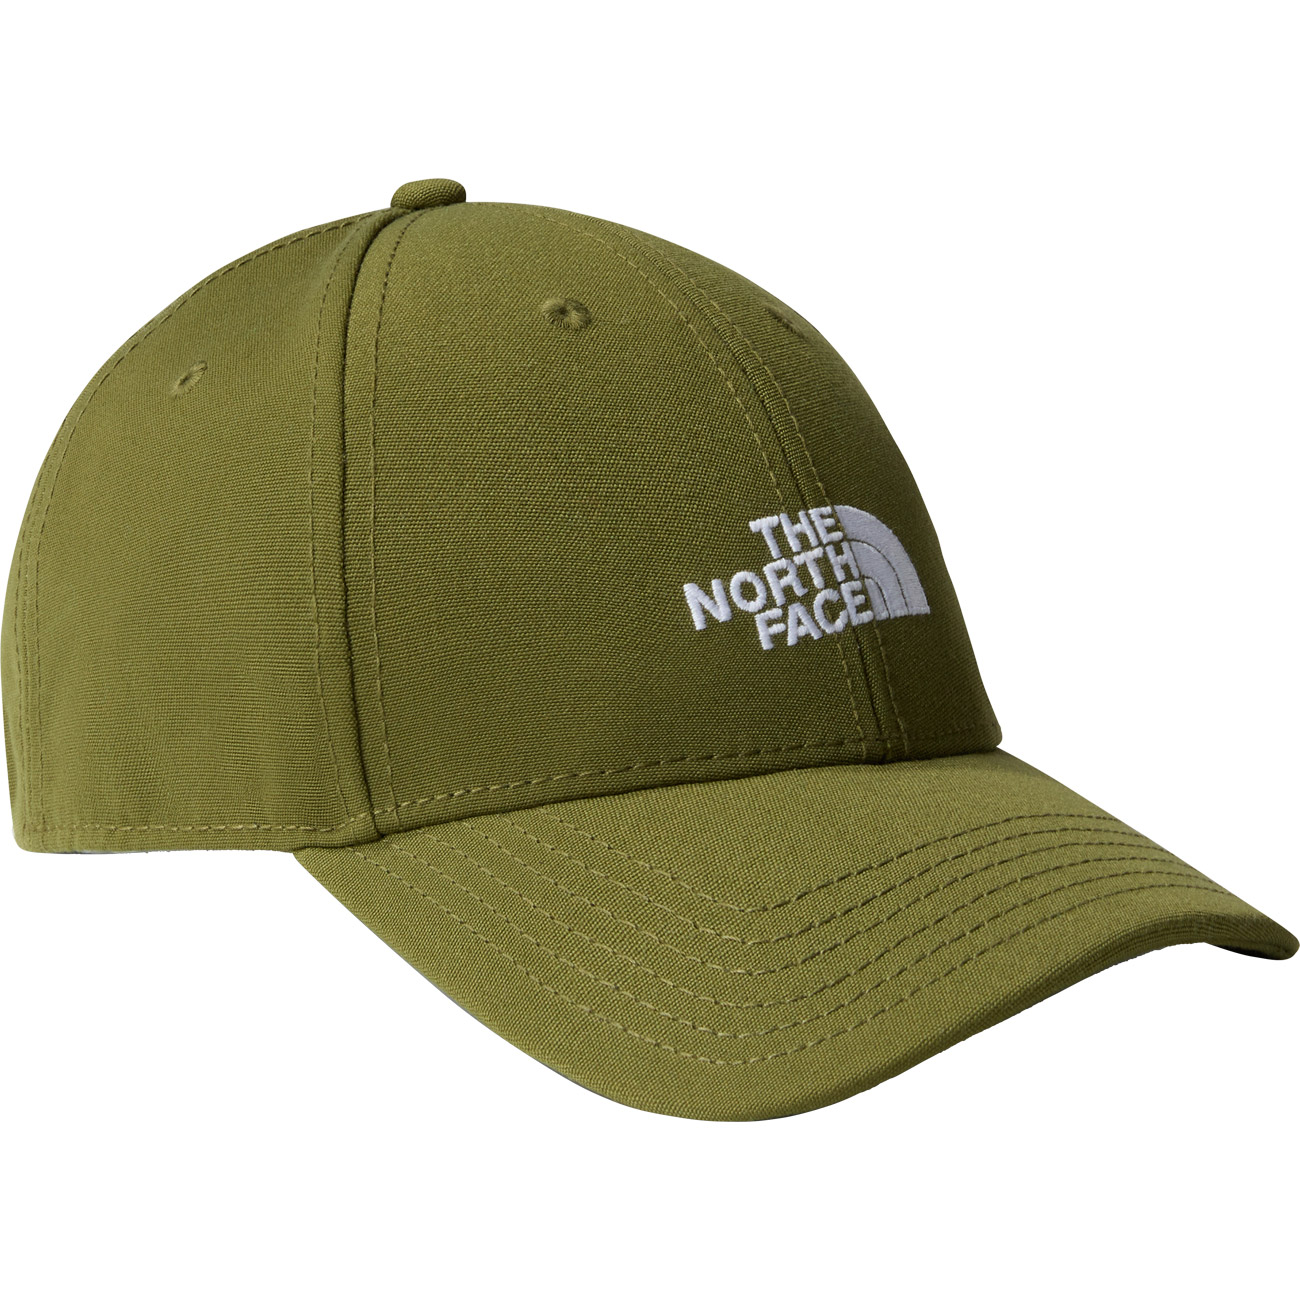 The North Face Cap Recycled 66 Classic